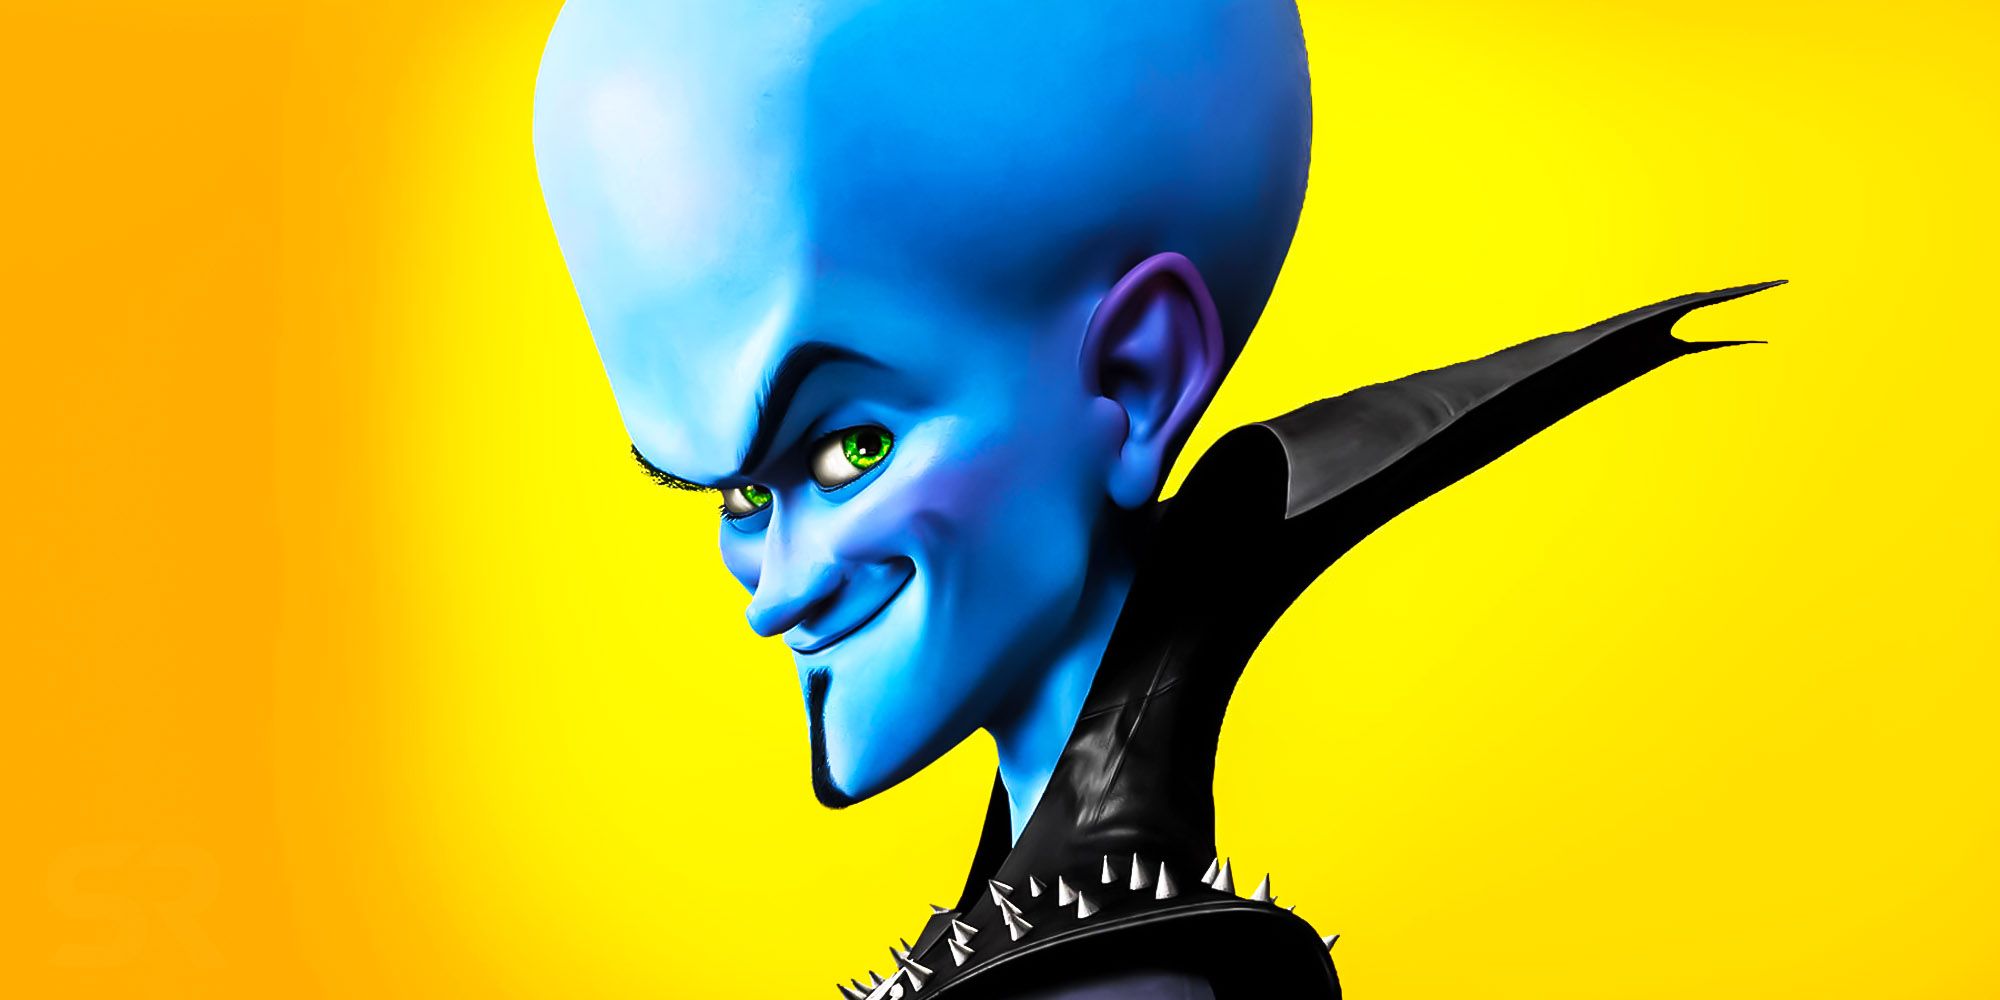 Why A Megamind TV Show Is Better Than A Movie Sequel